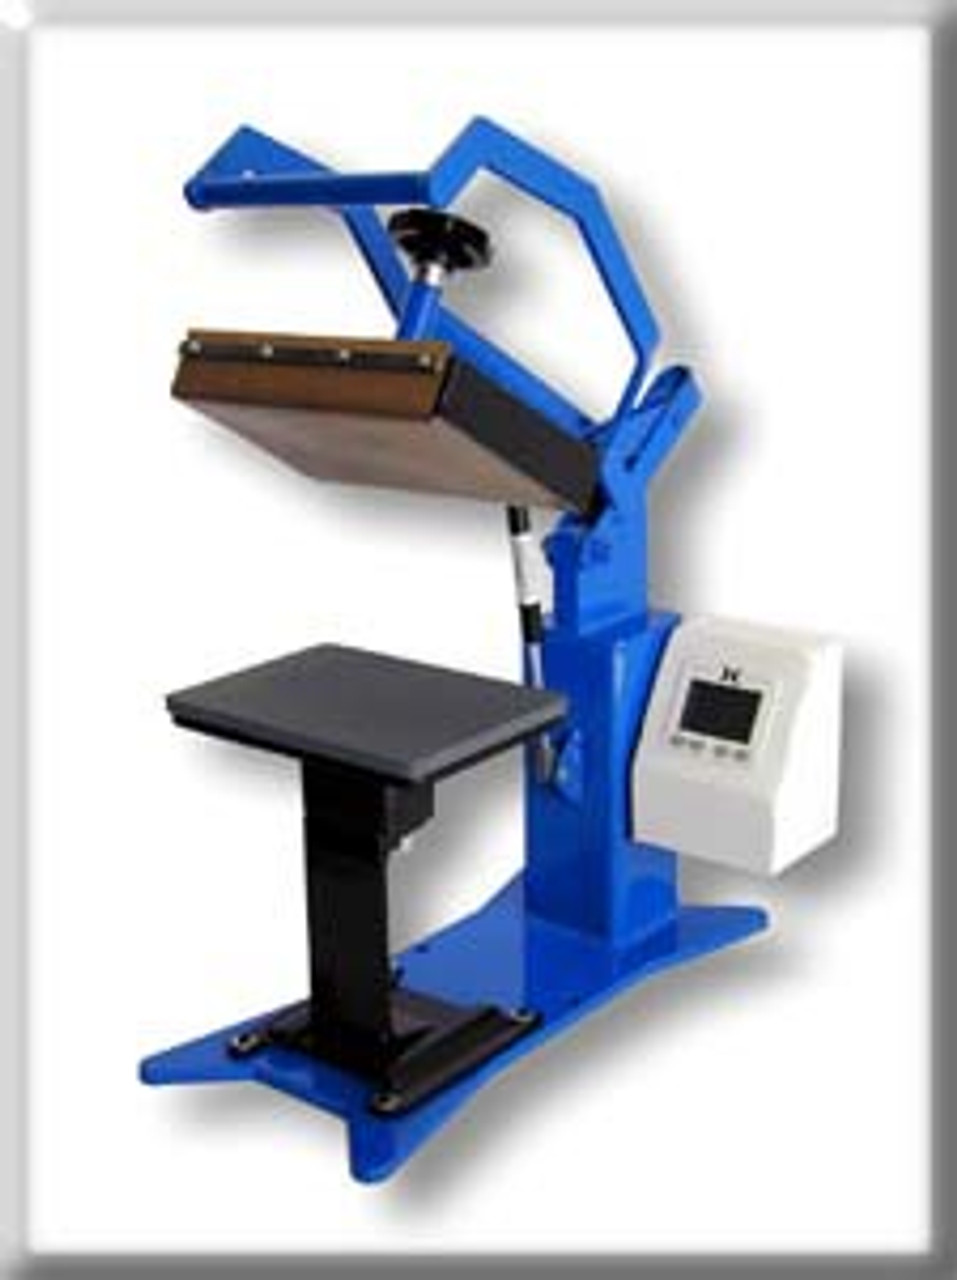 Geo Knight Co Heat Presses Made in USA: The Best Heat Press And